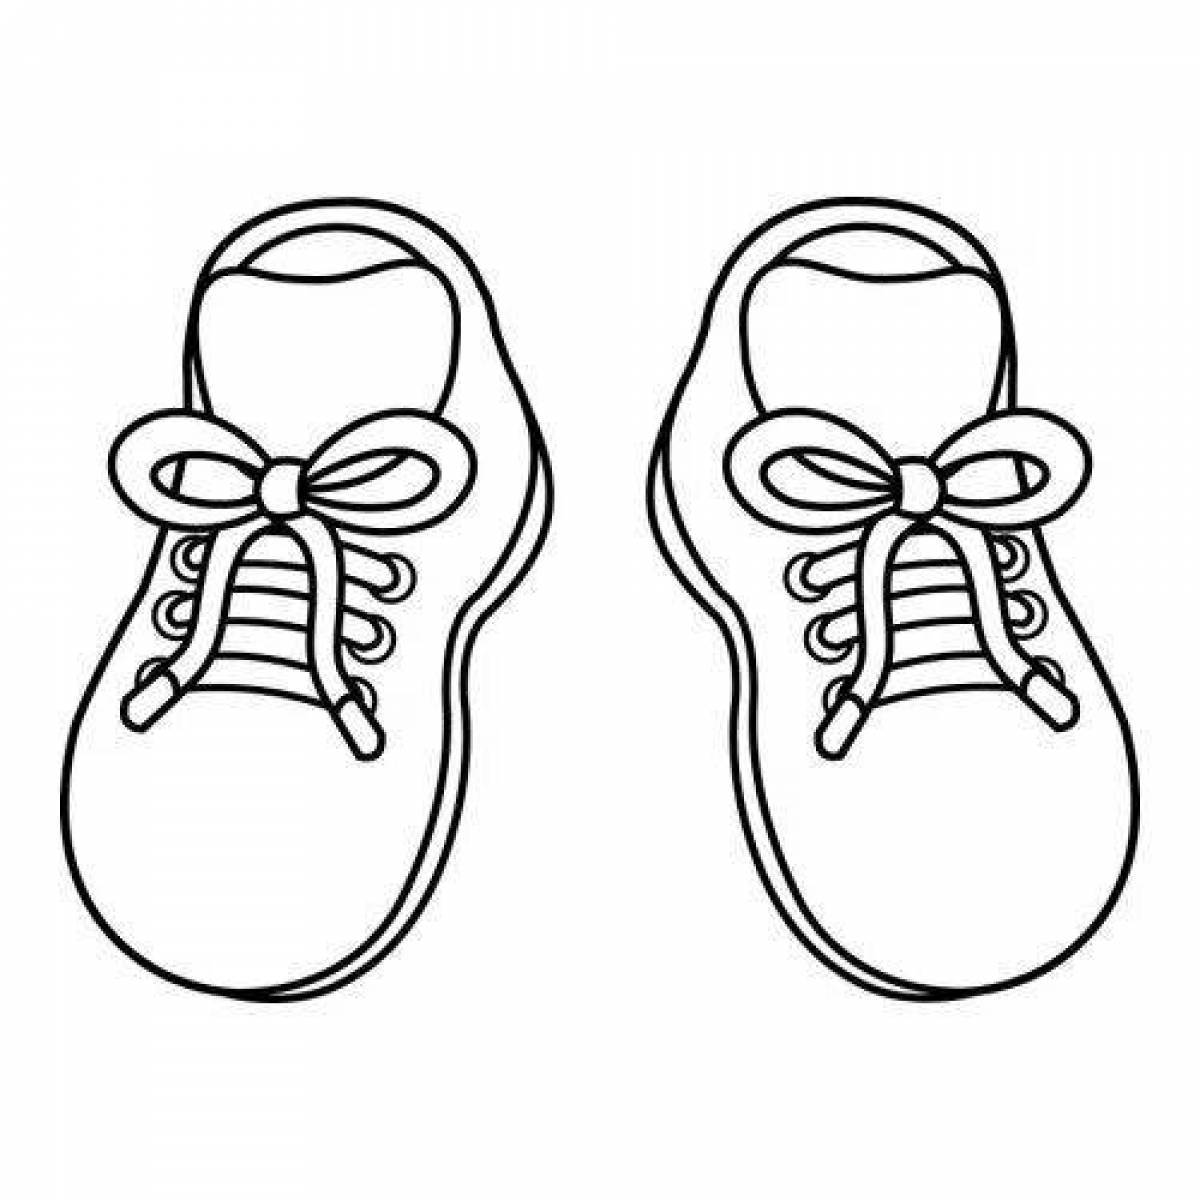 Coloring page elegant shoes for children 5-6 years old